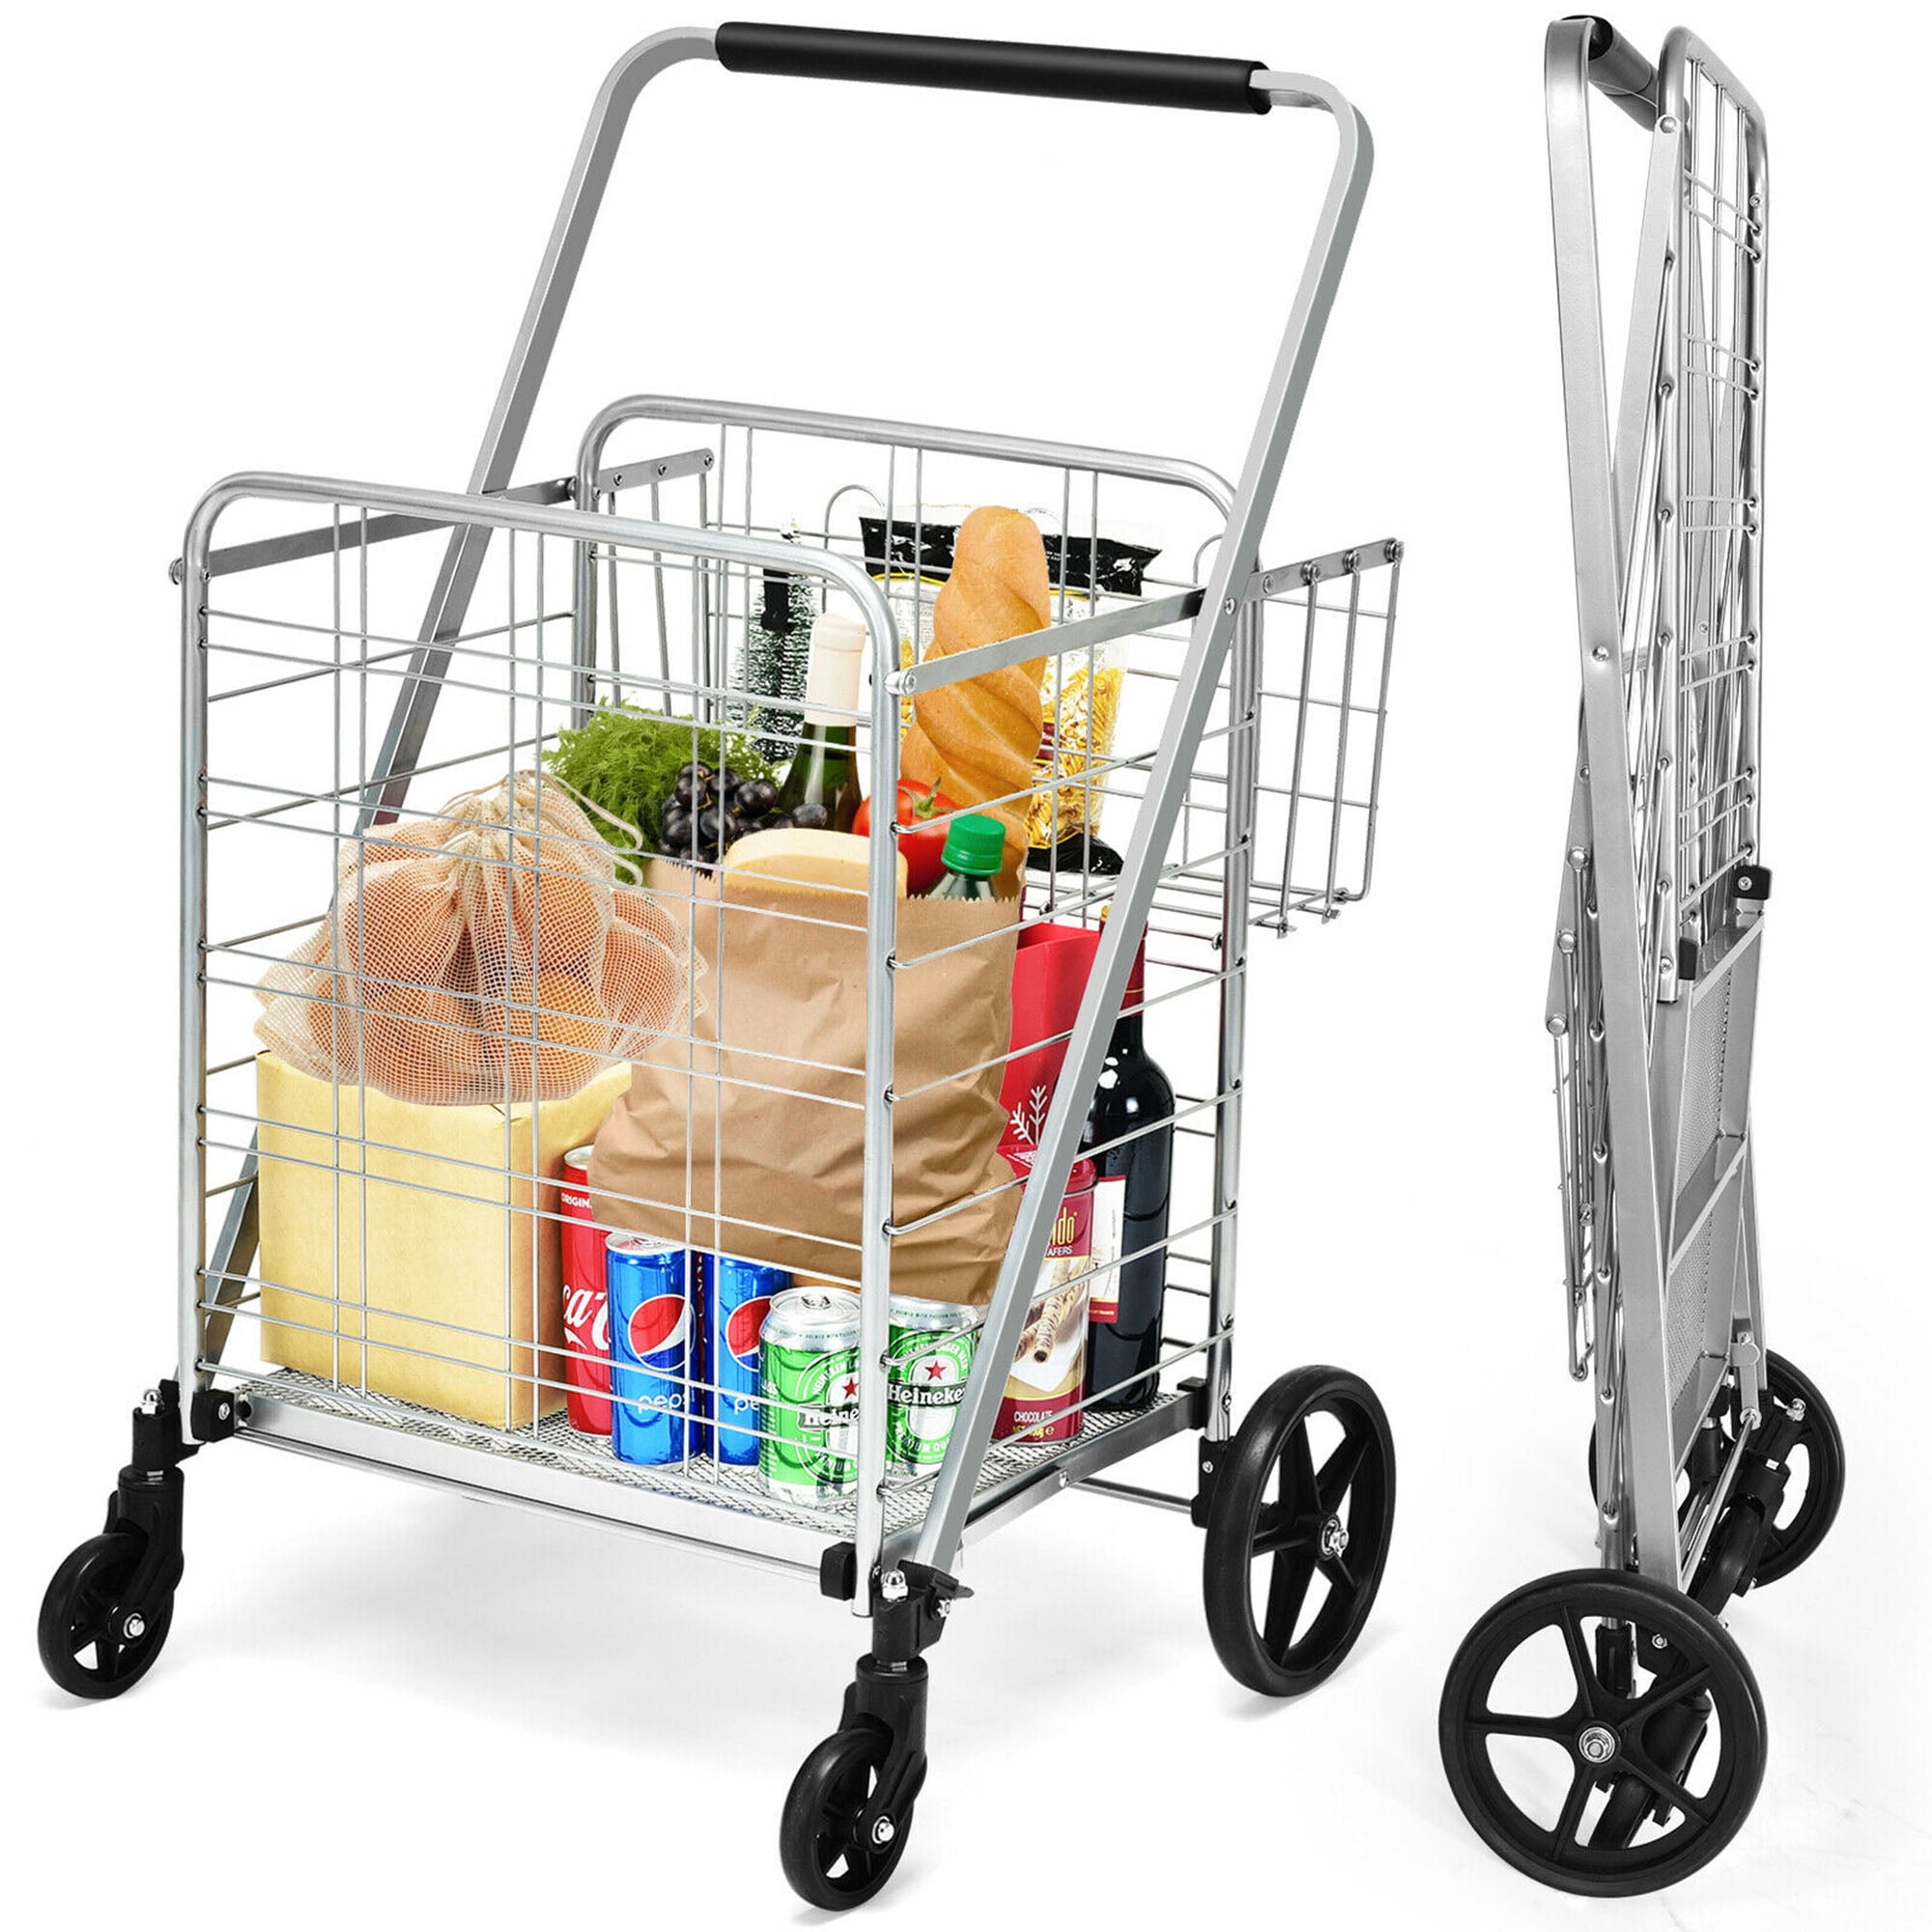 Large and Light Maximum Capacity 40kg with Detachable Bag Multi-Color Optional Color : A WRL&GJP-SLC Shopping Trolley， Shopping Cart Collapsible Shopping Cart with Wheels